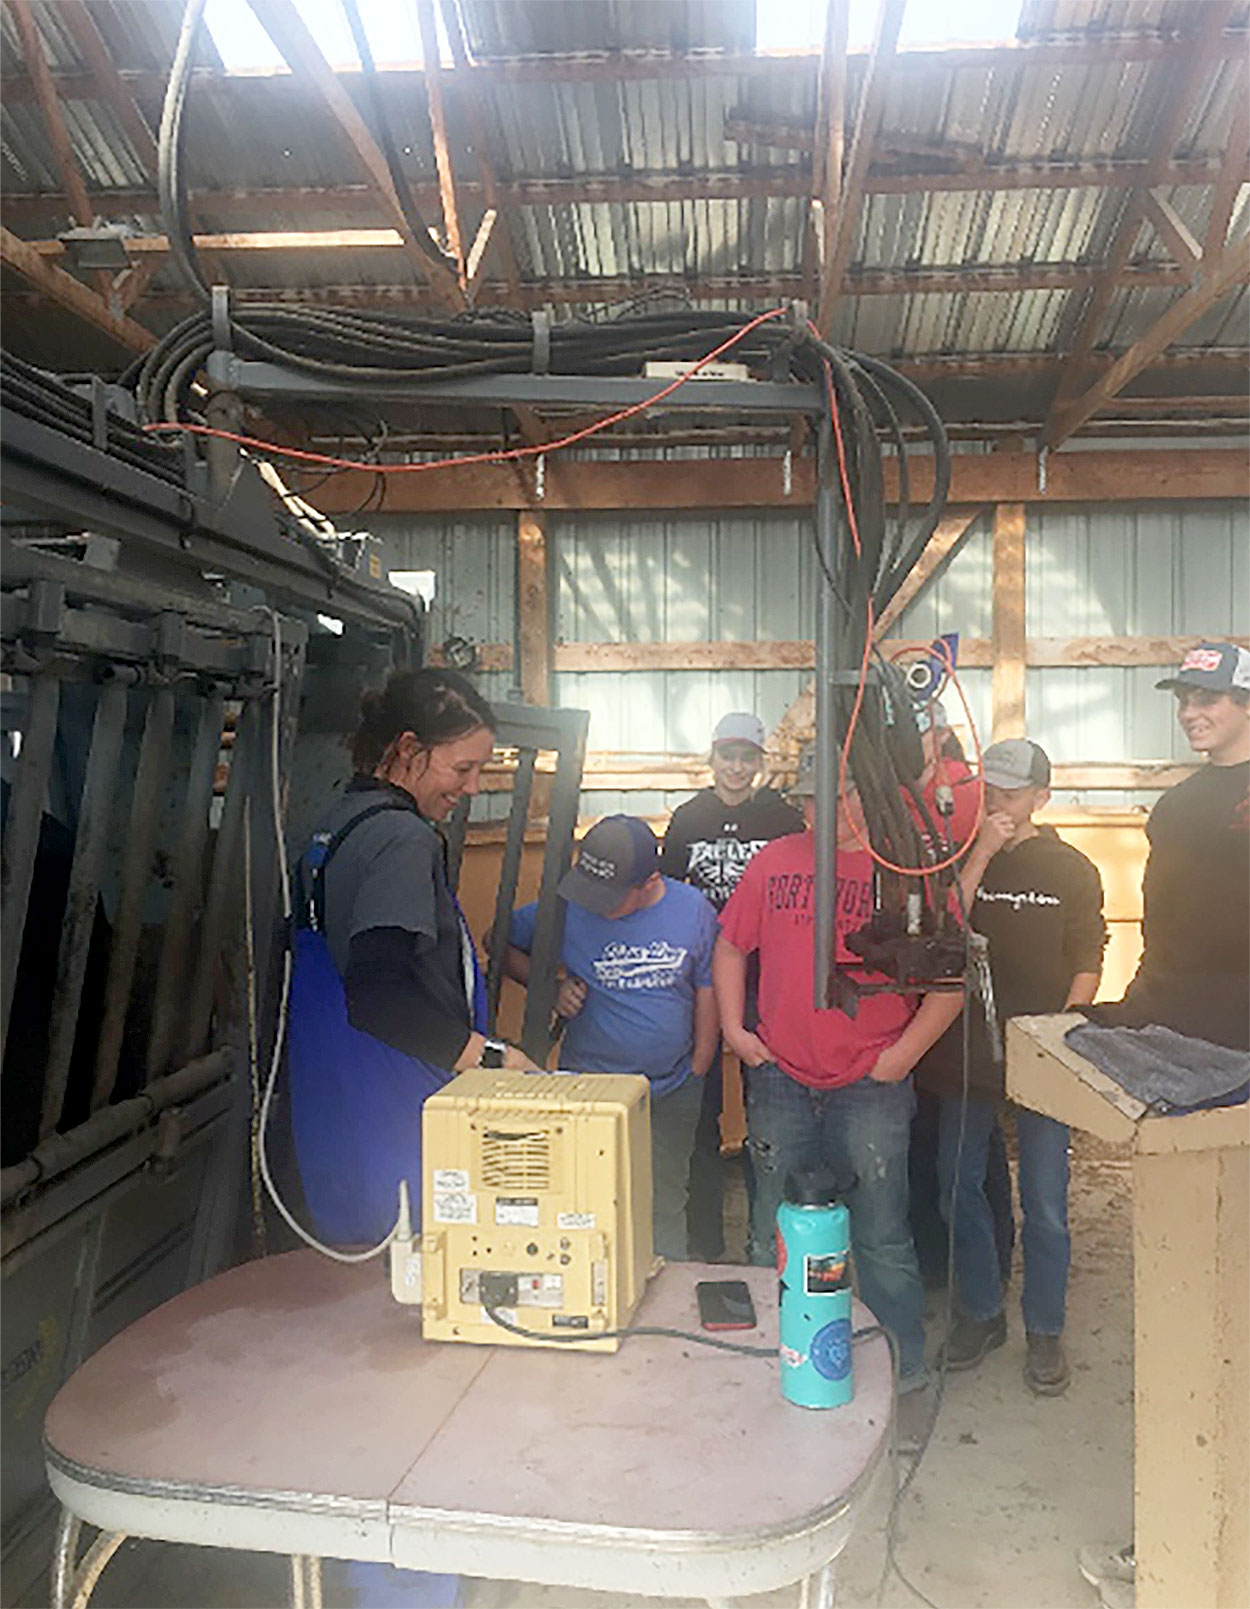 Olivia Amundson, SDSU Extension Cow/ Calf Specialist, demonstrating an ultrasound machine to a group of 4-H youth.